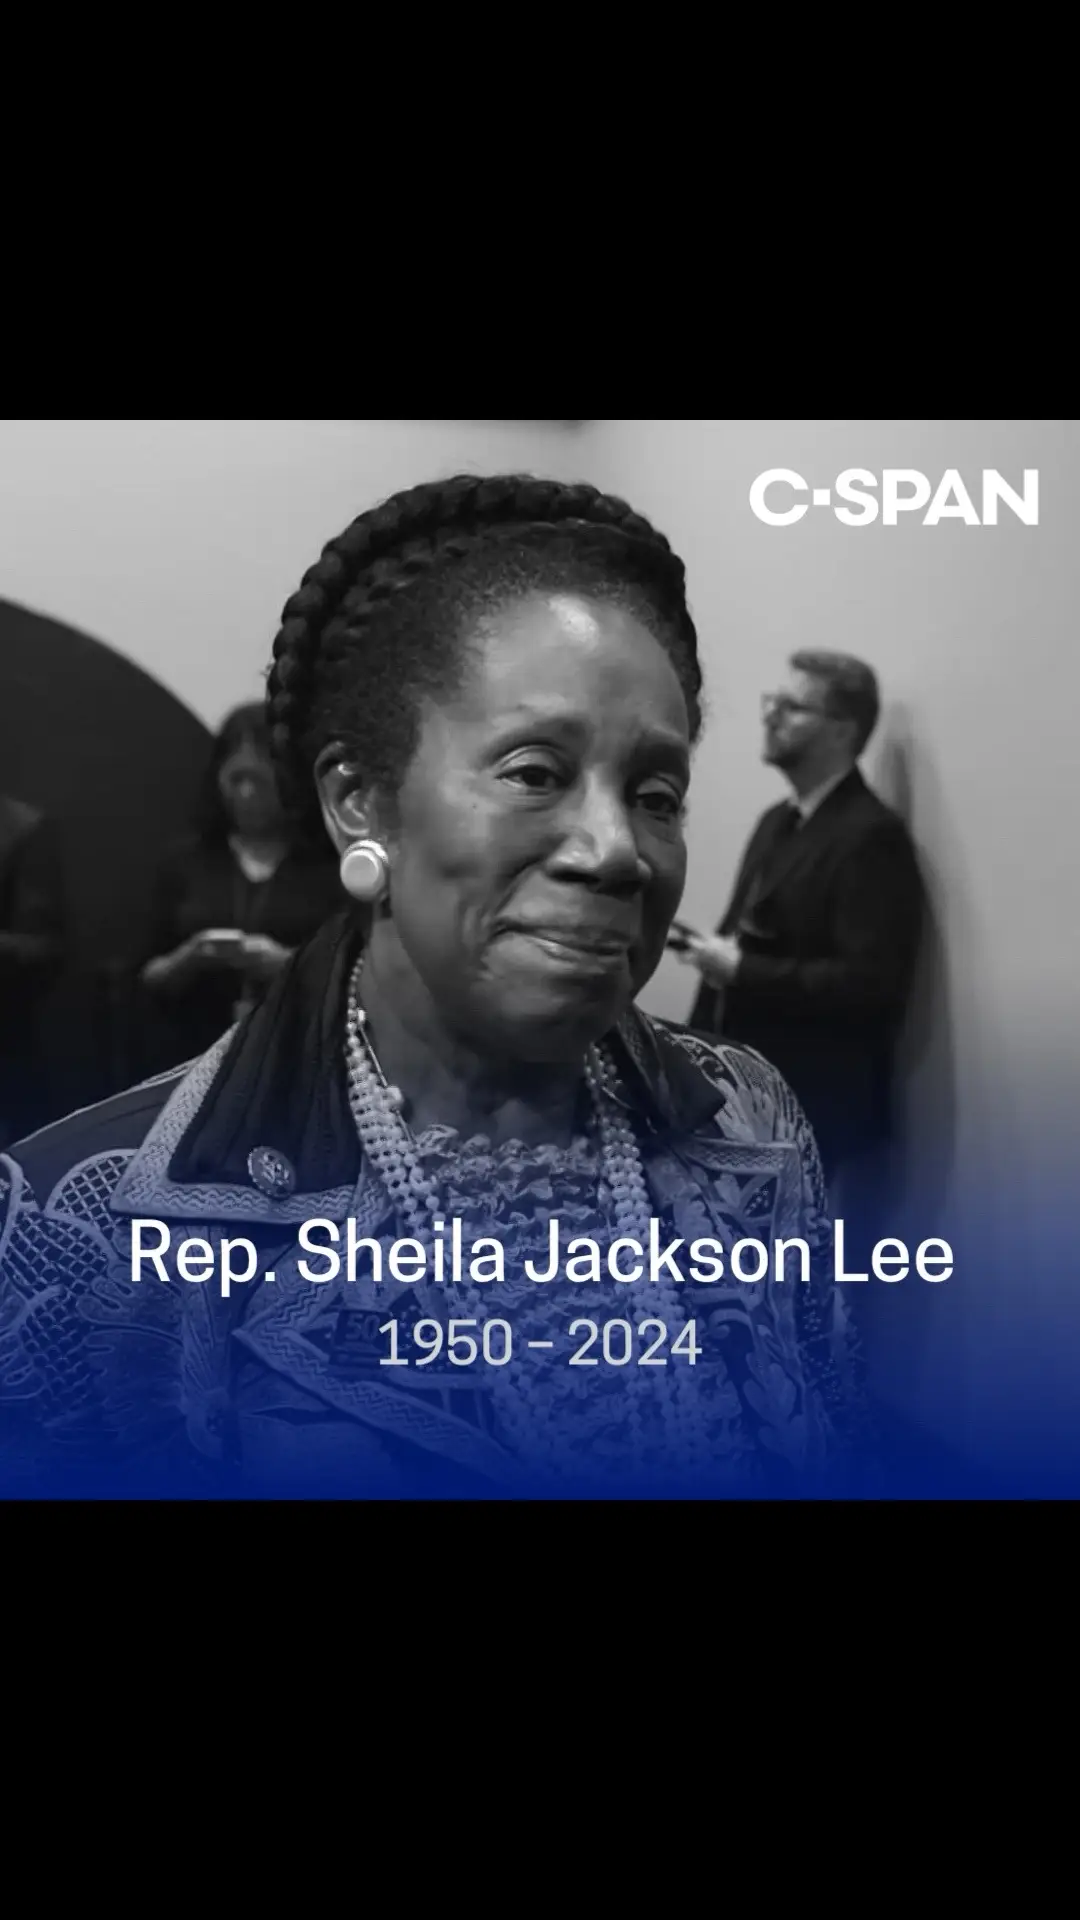 Rep. Sheila Jackson Lee (D-TX) has died at the age of 74 after a battle with pancreatic cancer, her family announced Friday night. “A fierce champion of the people, she was affectionately and simply known as ‘Congresswoman’ by her constituents in recognition of her near-ubiquitous presence and service to their daily lives for more than 30 years. A local, national, and international humanitarian, she was acknowledged worldwide for her courageous fights for racial justice, criminal justice, and human rights, with a special emphasis on women and children,” her family said in a statement. Rep. Jackson Lee was first elected to Congress in 1994 and served on the Judiciary, Homeland Security and Budget committees. “Her legislative victories impacted millions, from establishing the Juneteenth Federal Holiday to reauthorizing the Violence Against Women Act. However, she impacted us most as our beloved wife, sister, mother, and Bebe (grandmother). She will be dearly missed, but her legacy will continue to inspire all who believe in freedom, justice, and democracy,” her family said. #sheilajacksonlee #houseofrepresentatives #congress #cspan 